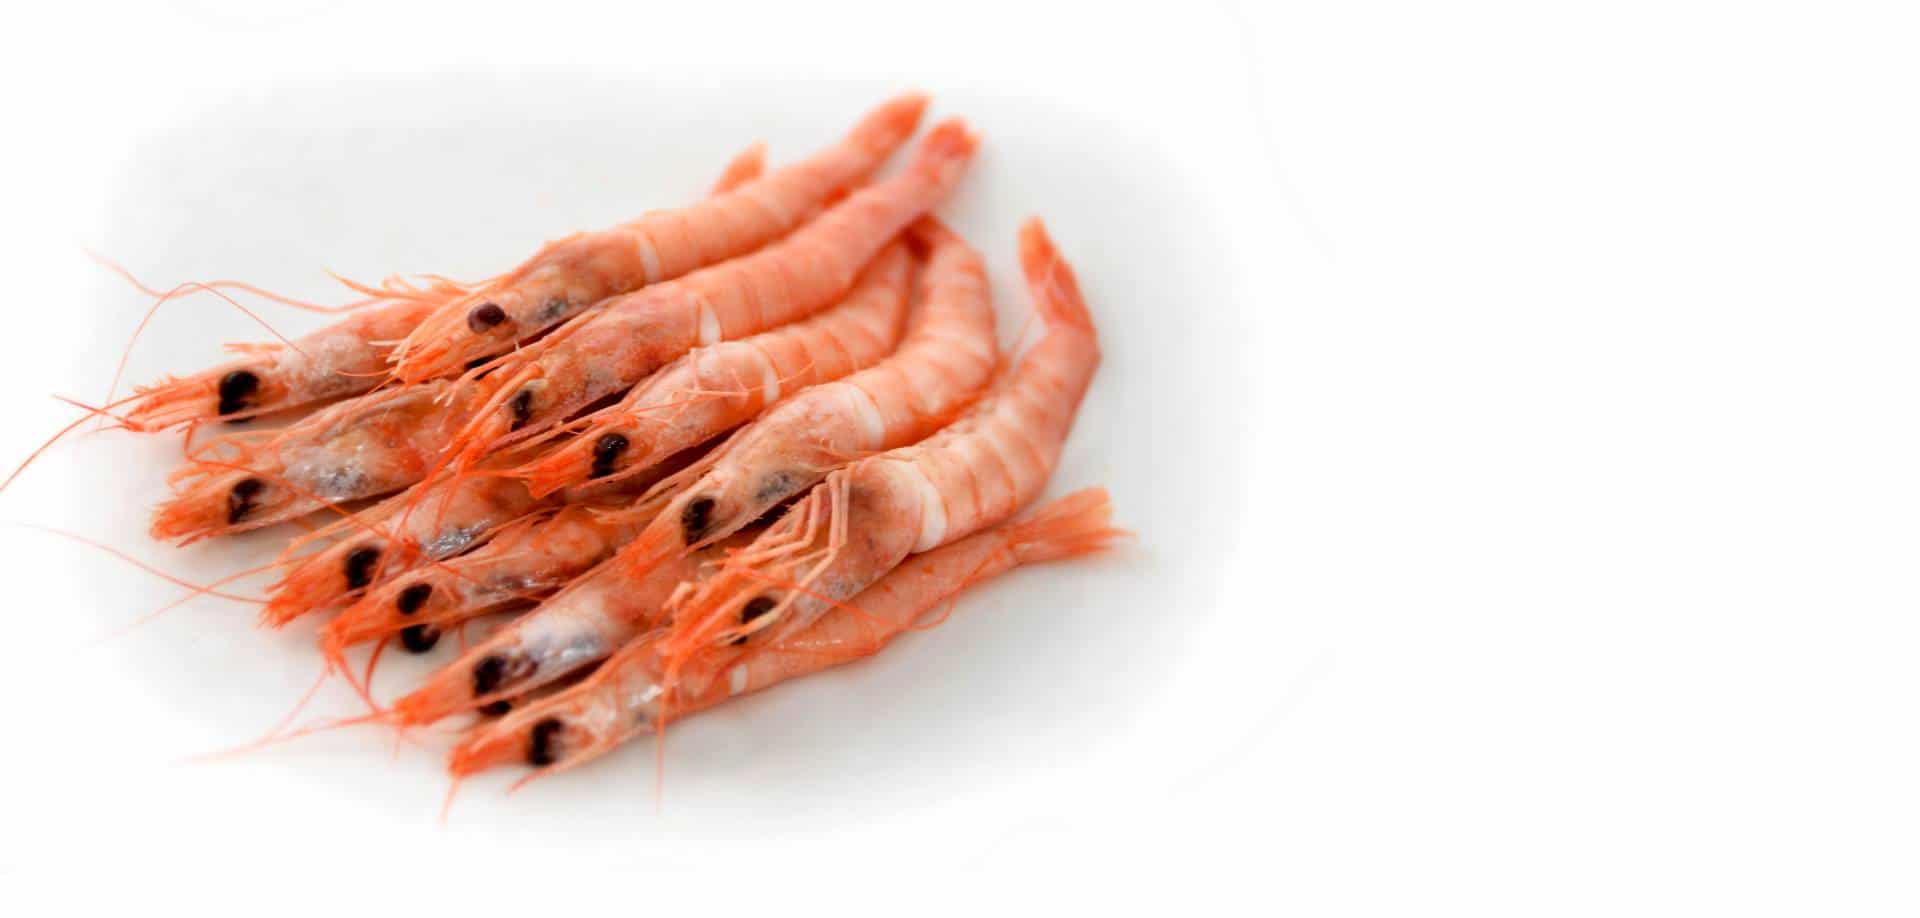 Frozen cooked white shrimp seafood guide